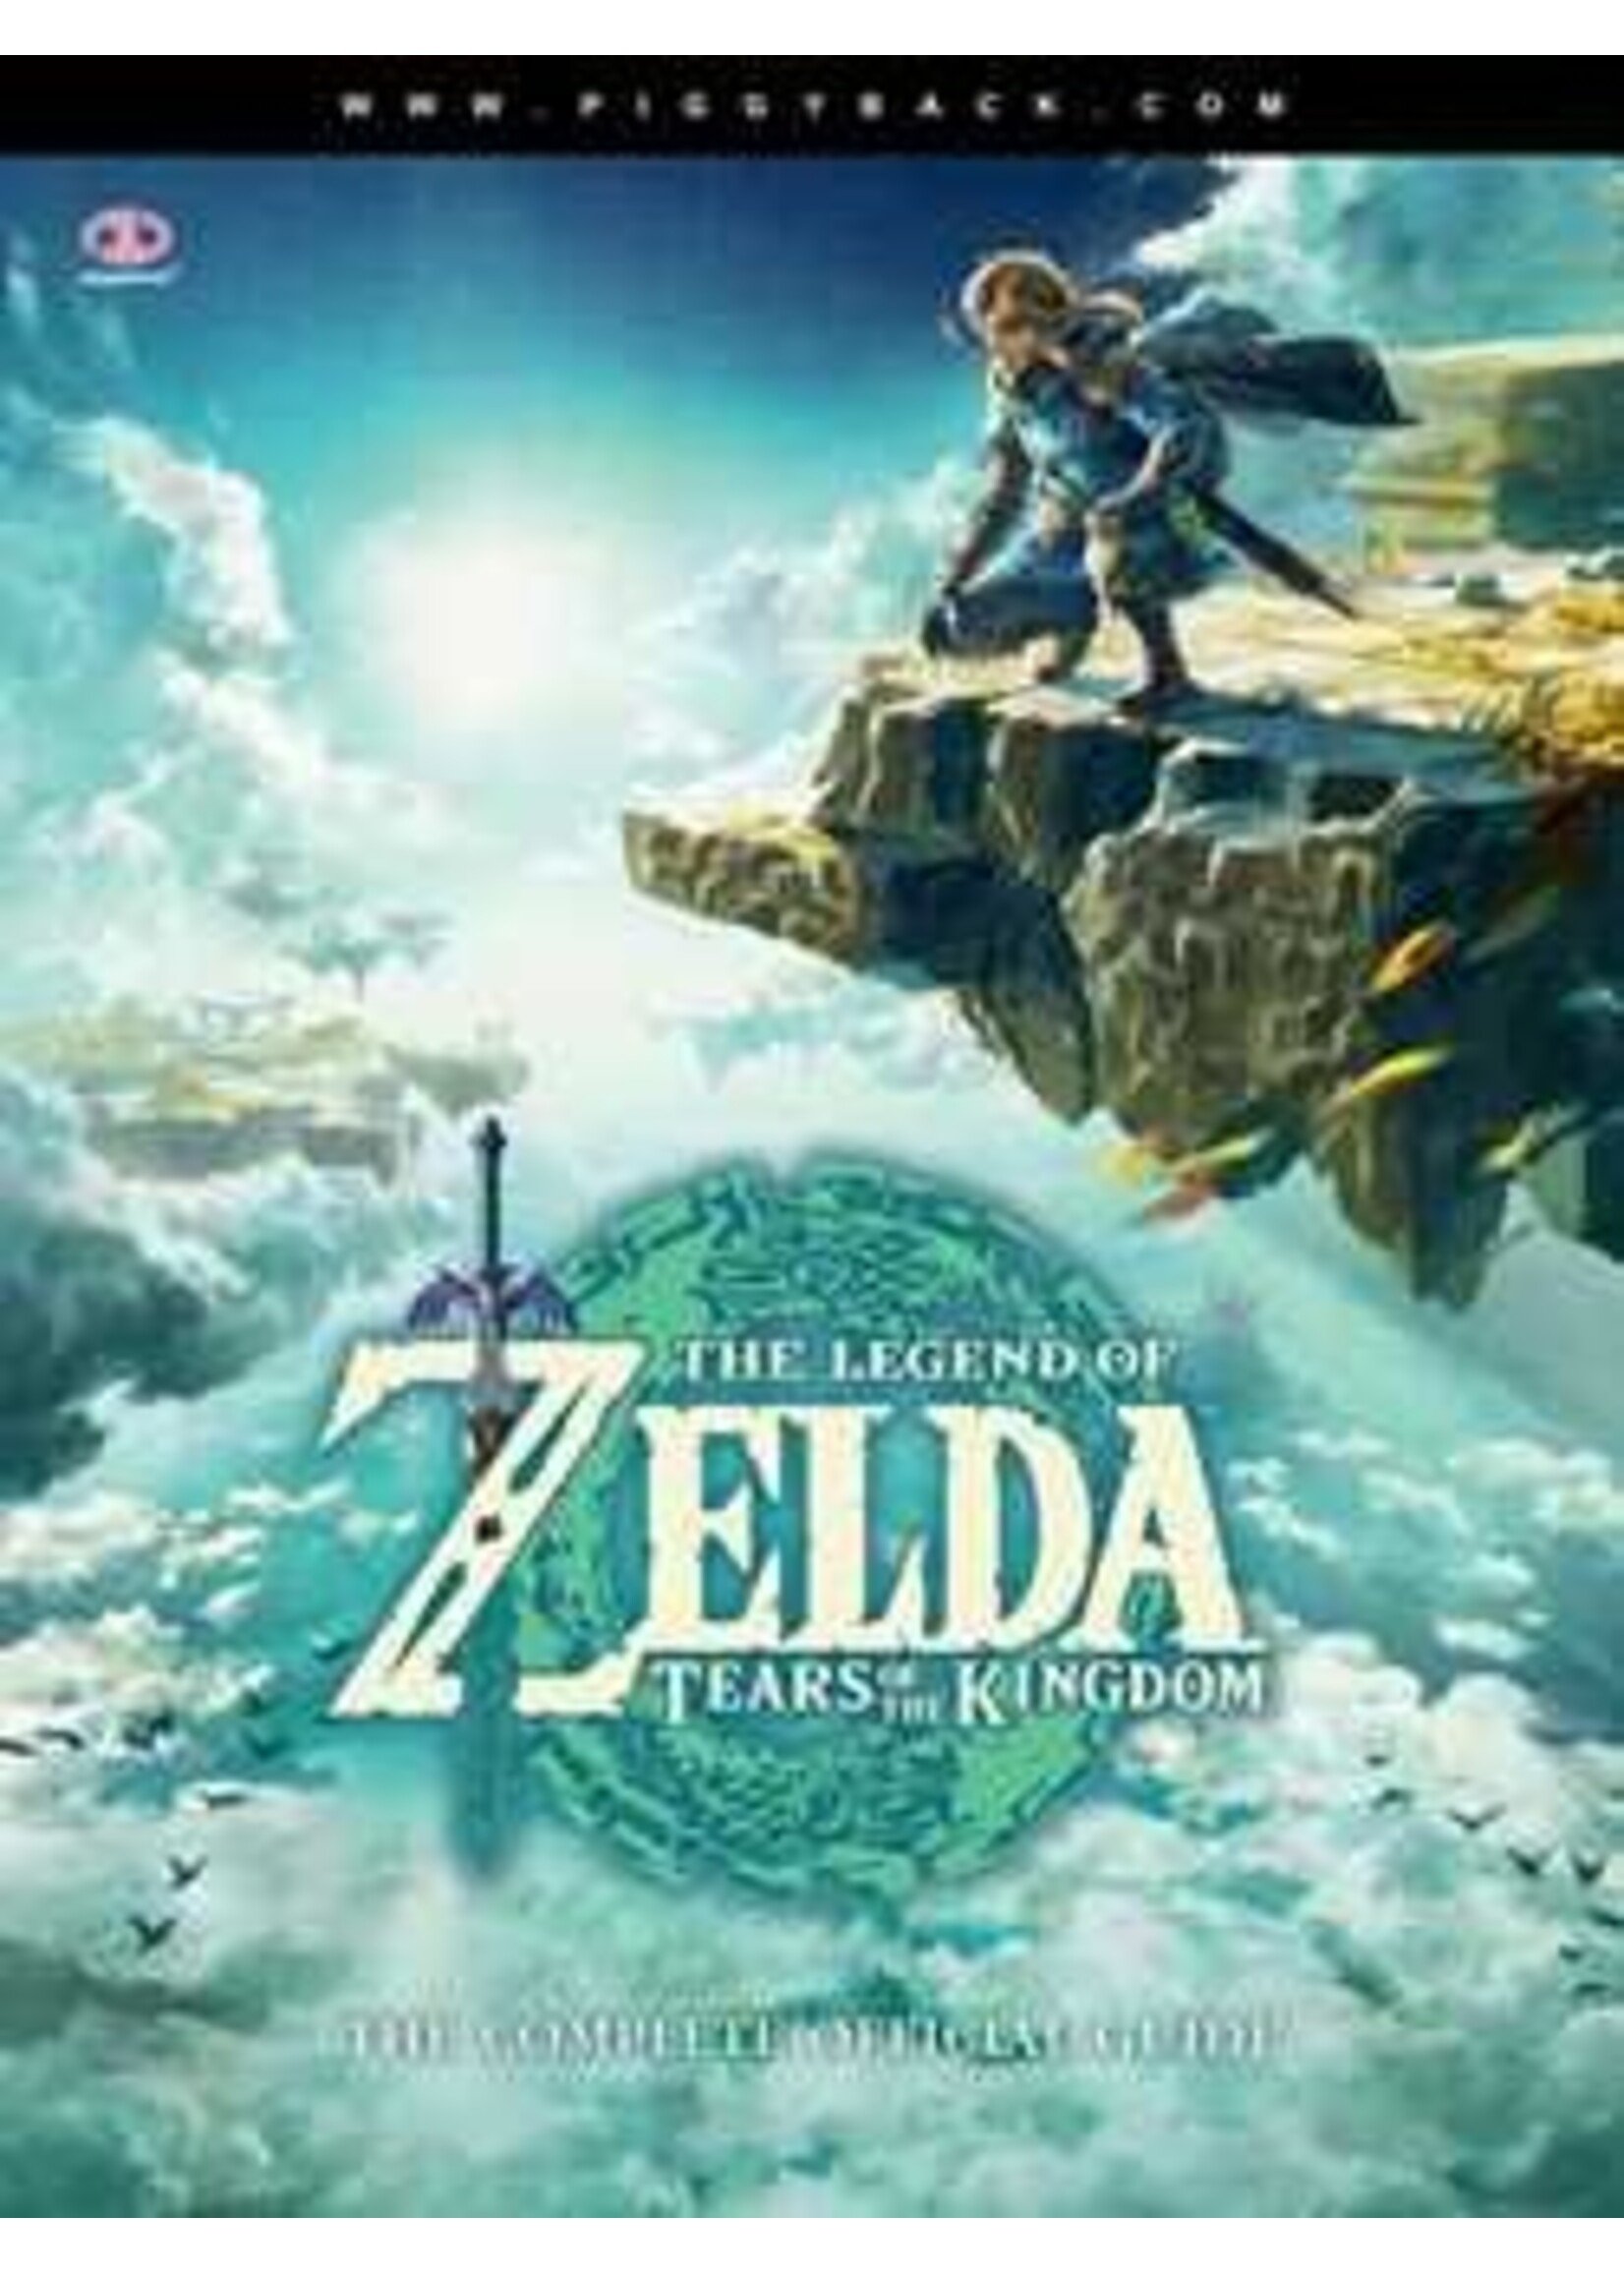 The Legend of Zelda™: Tears of the Kingdom – The Complete Official Guide (Standard Edition) by Piggyback